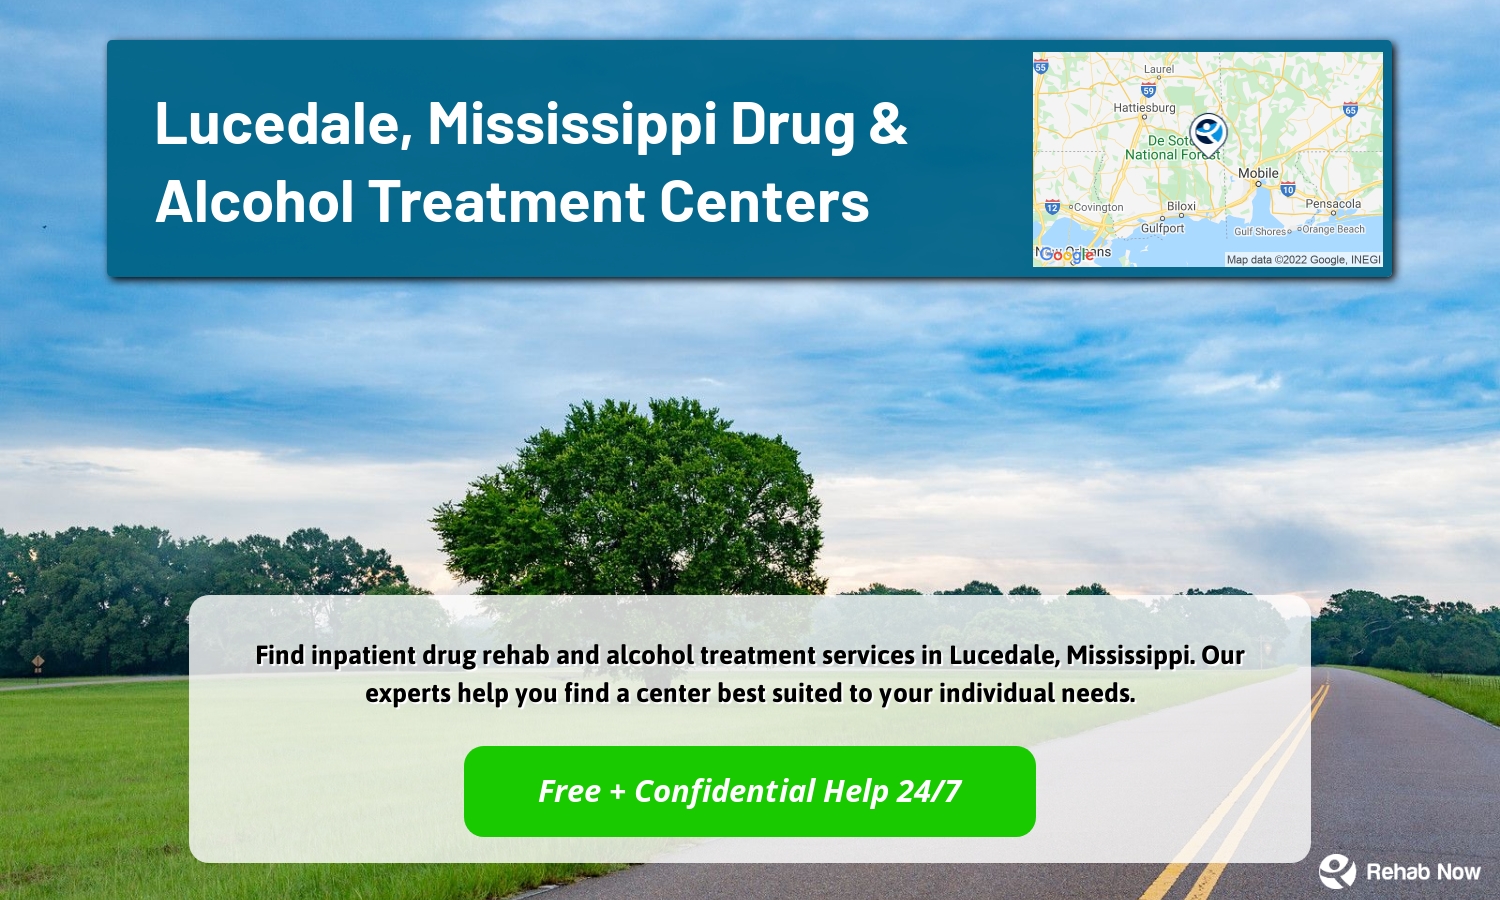 Find inpatient drug rehab and alcohol treatment services in Lucedale, Mississippi. Our experts help you find a center best suited to your individual needs.